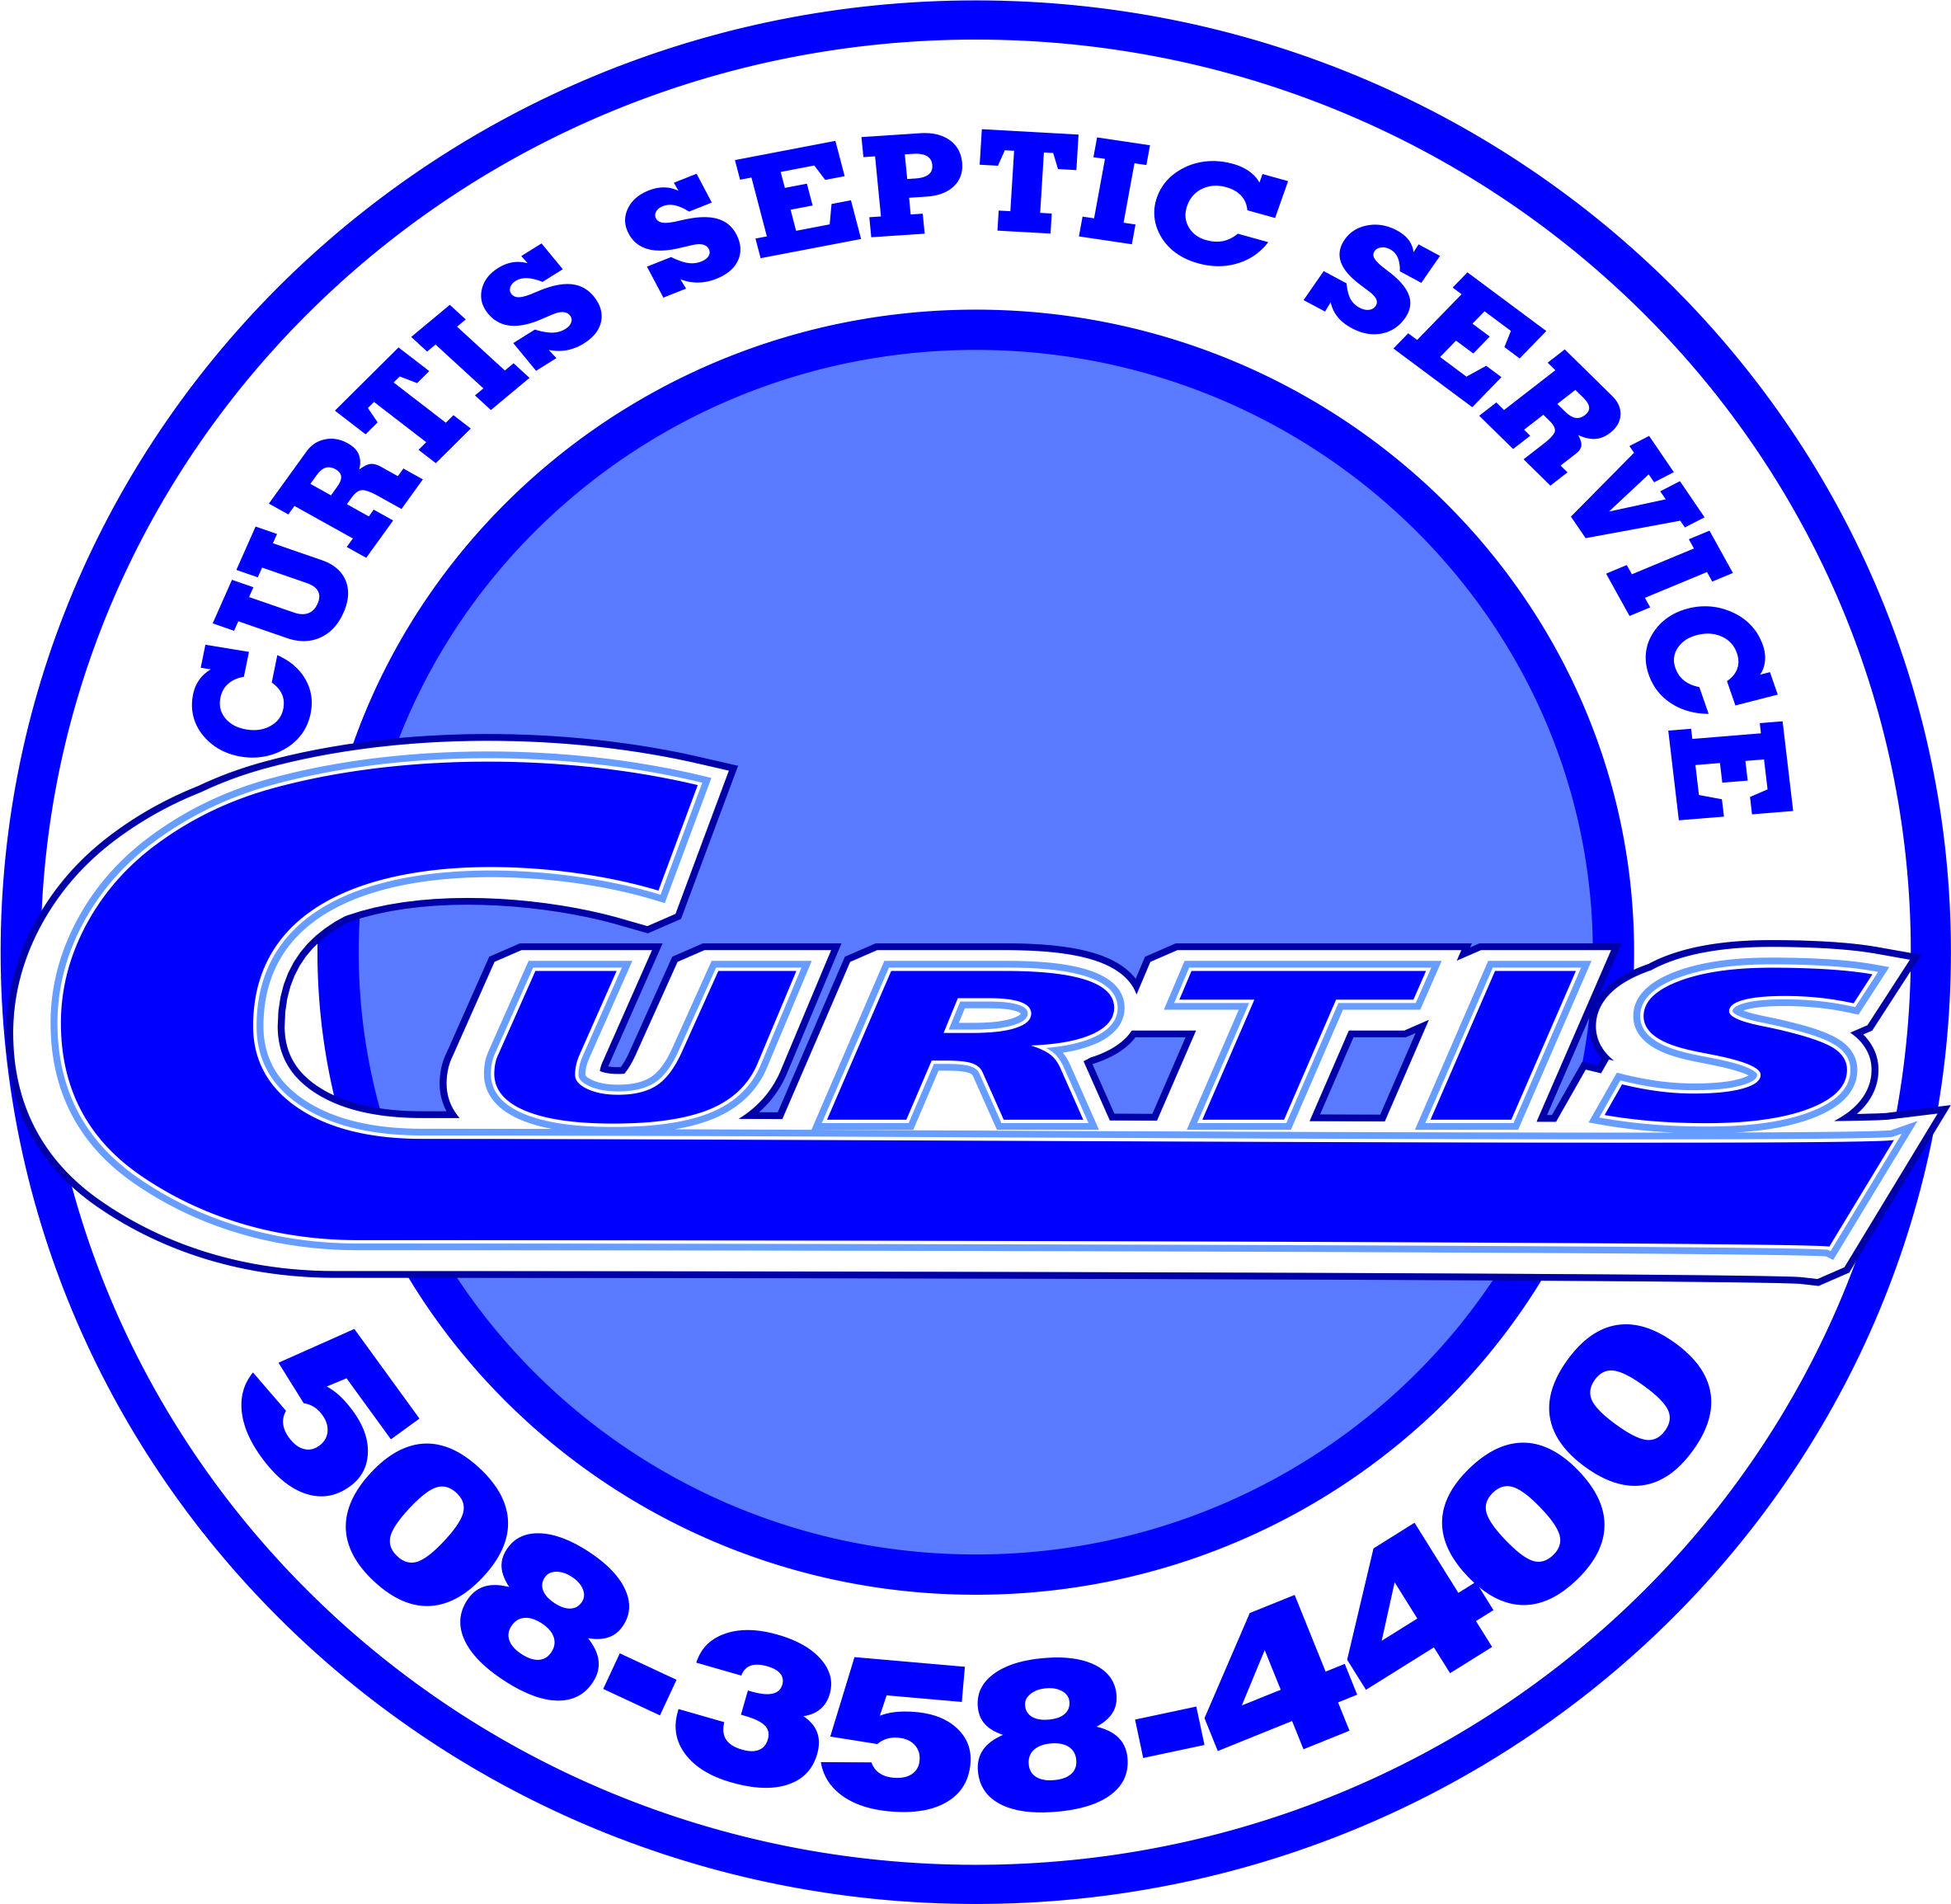 Septic system inspectors in Chelmsford, MA.